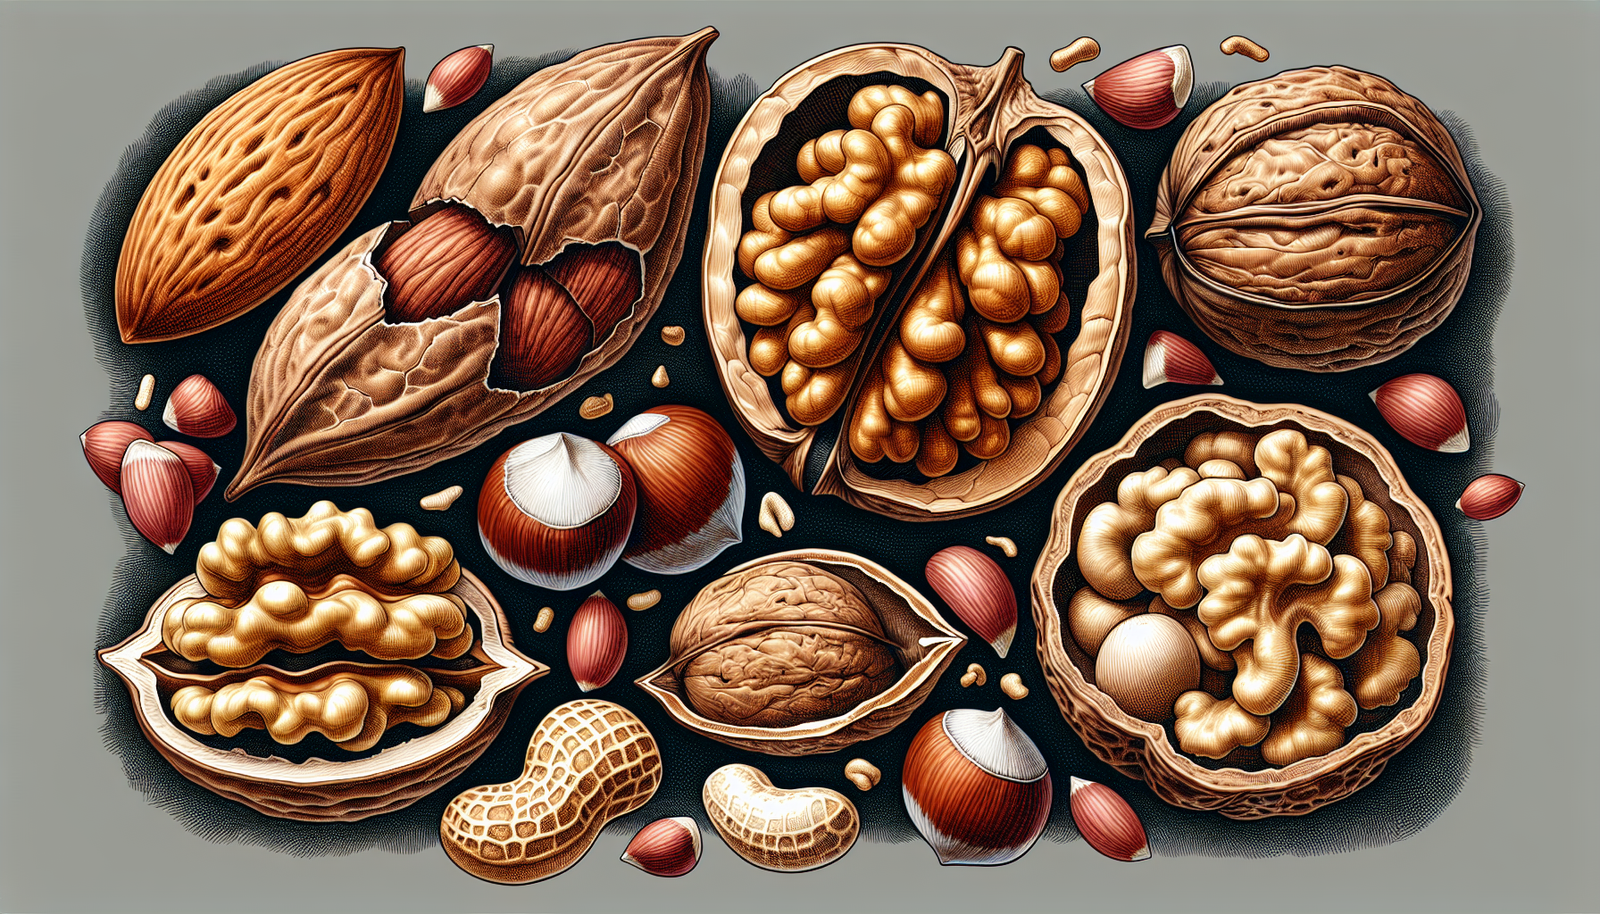 Illustration of various nuts